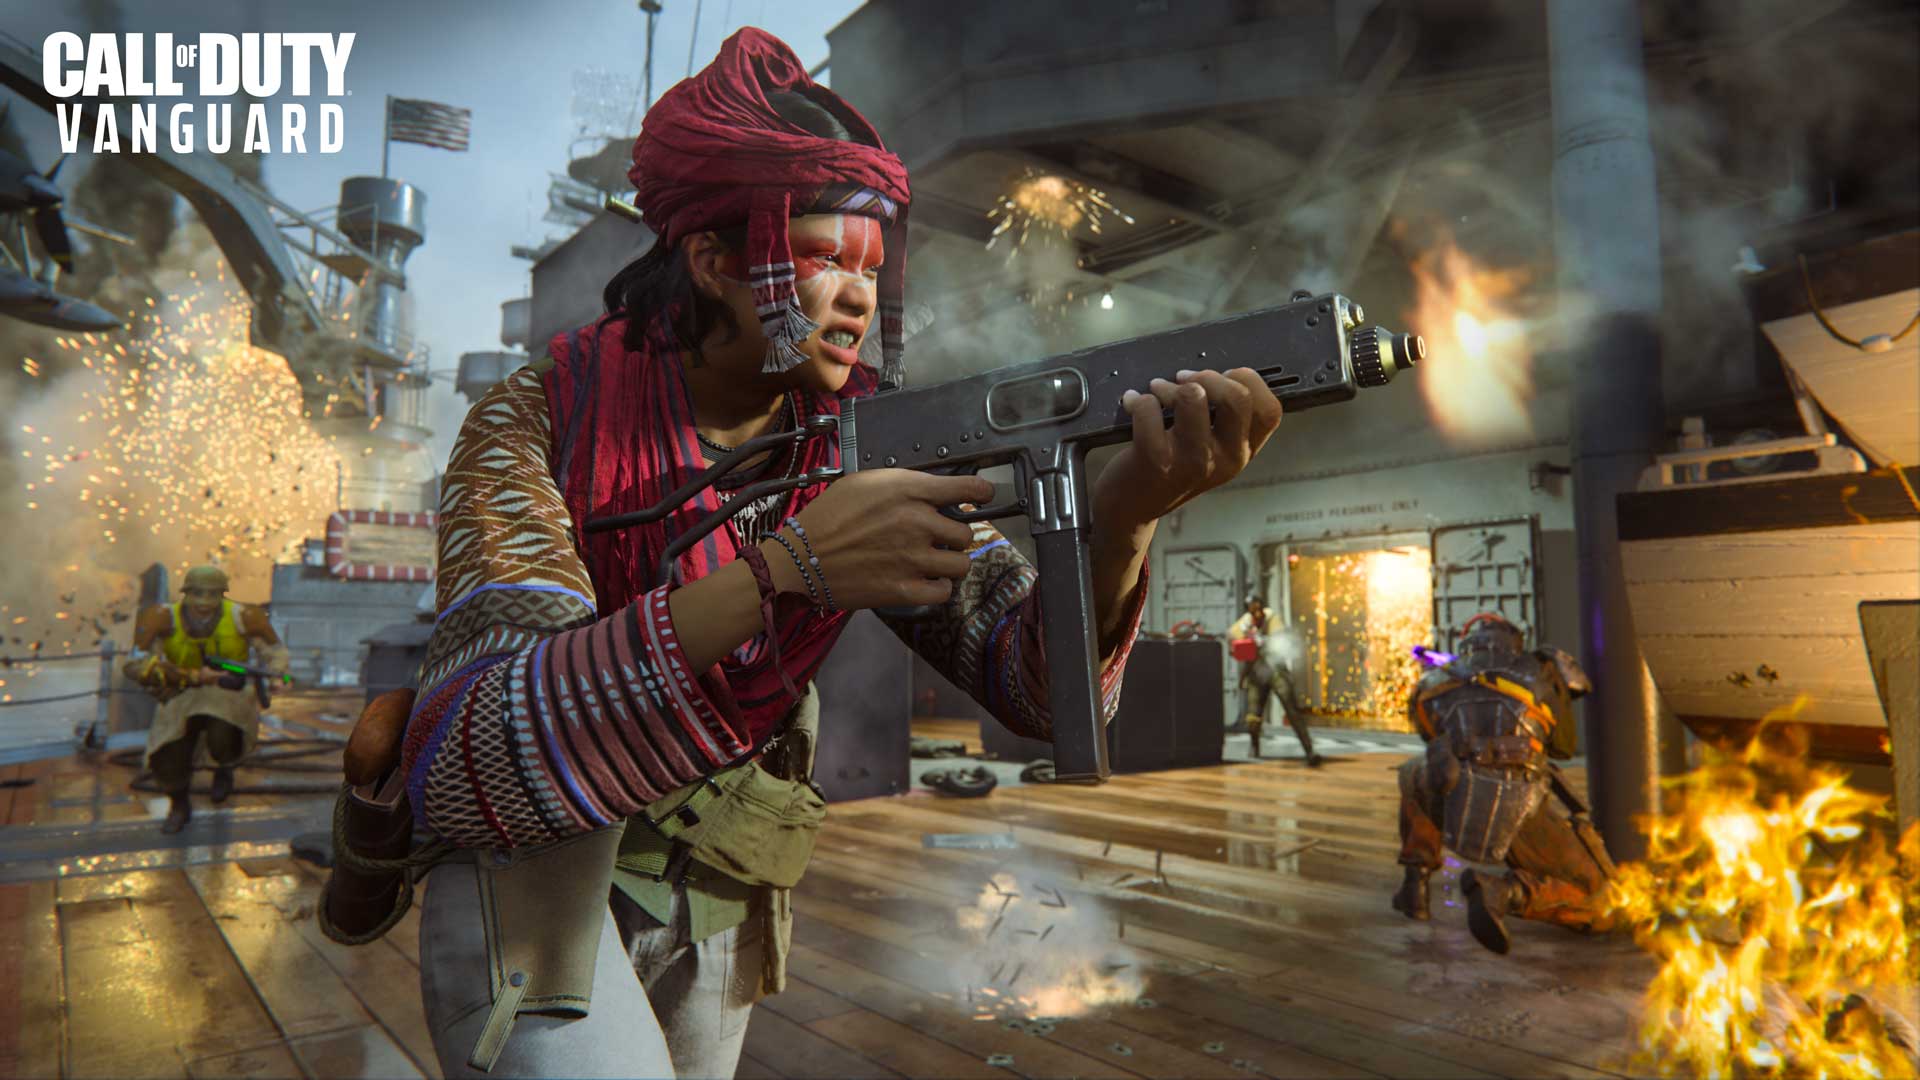 Image for Call of Duty: Vanguard multiplayer and Zombies free to play for one week